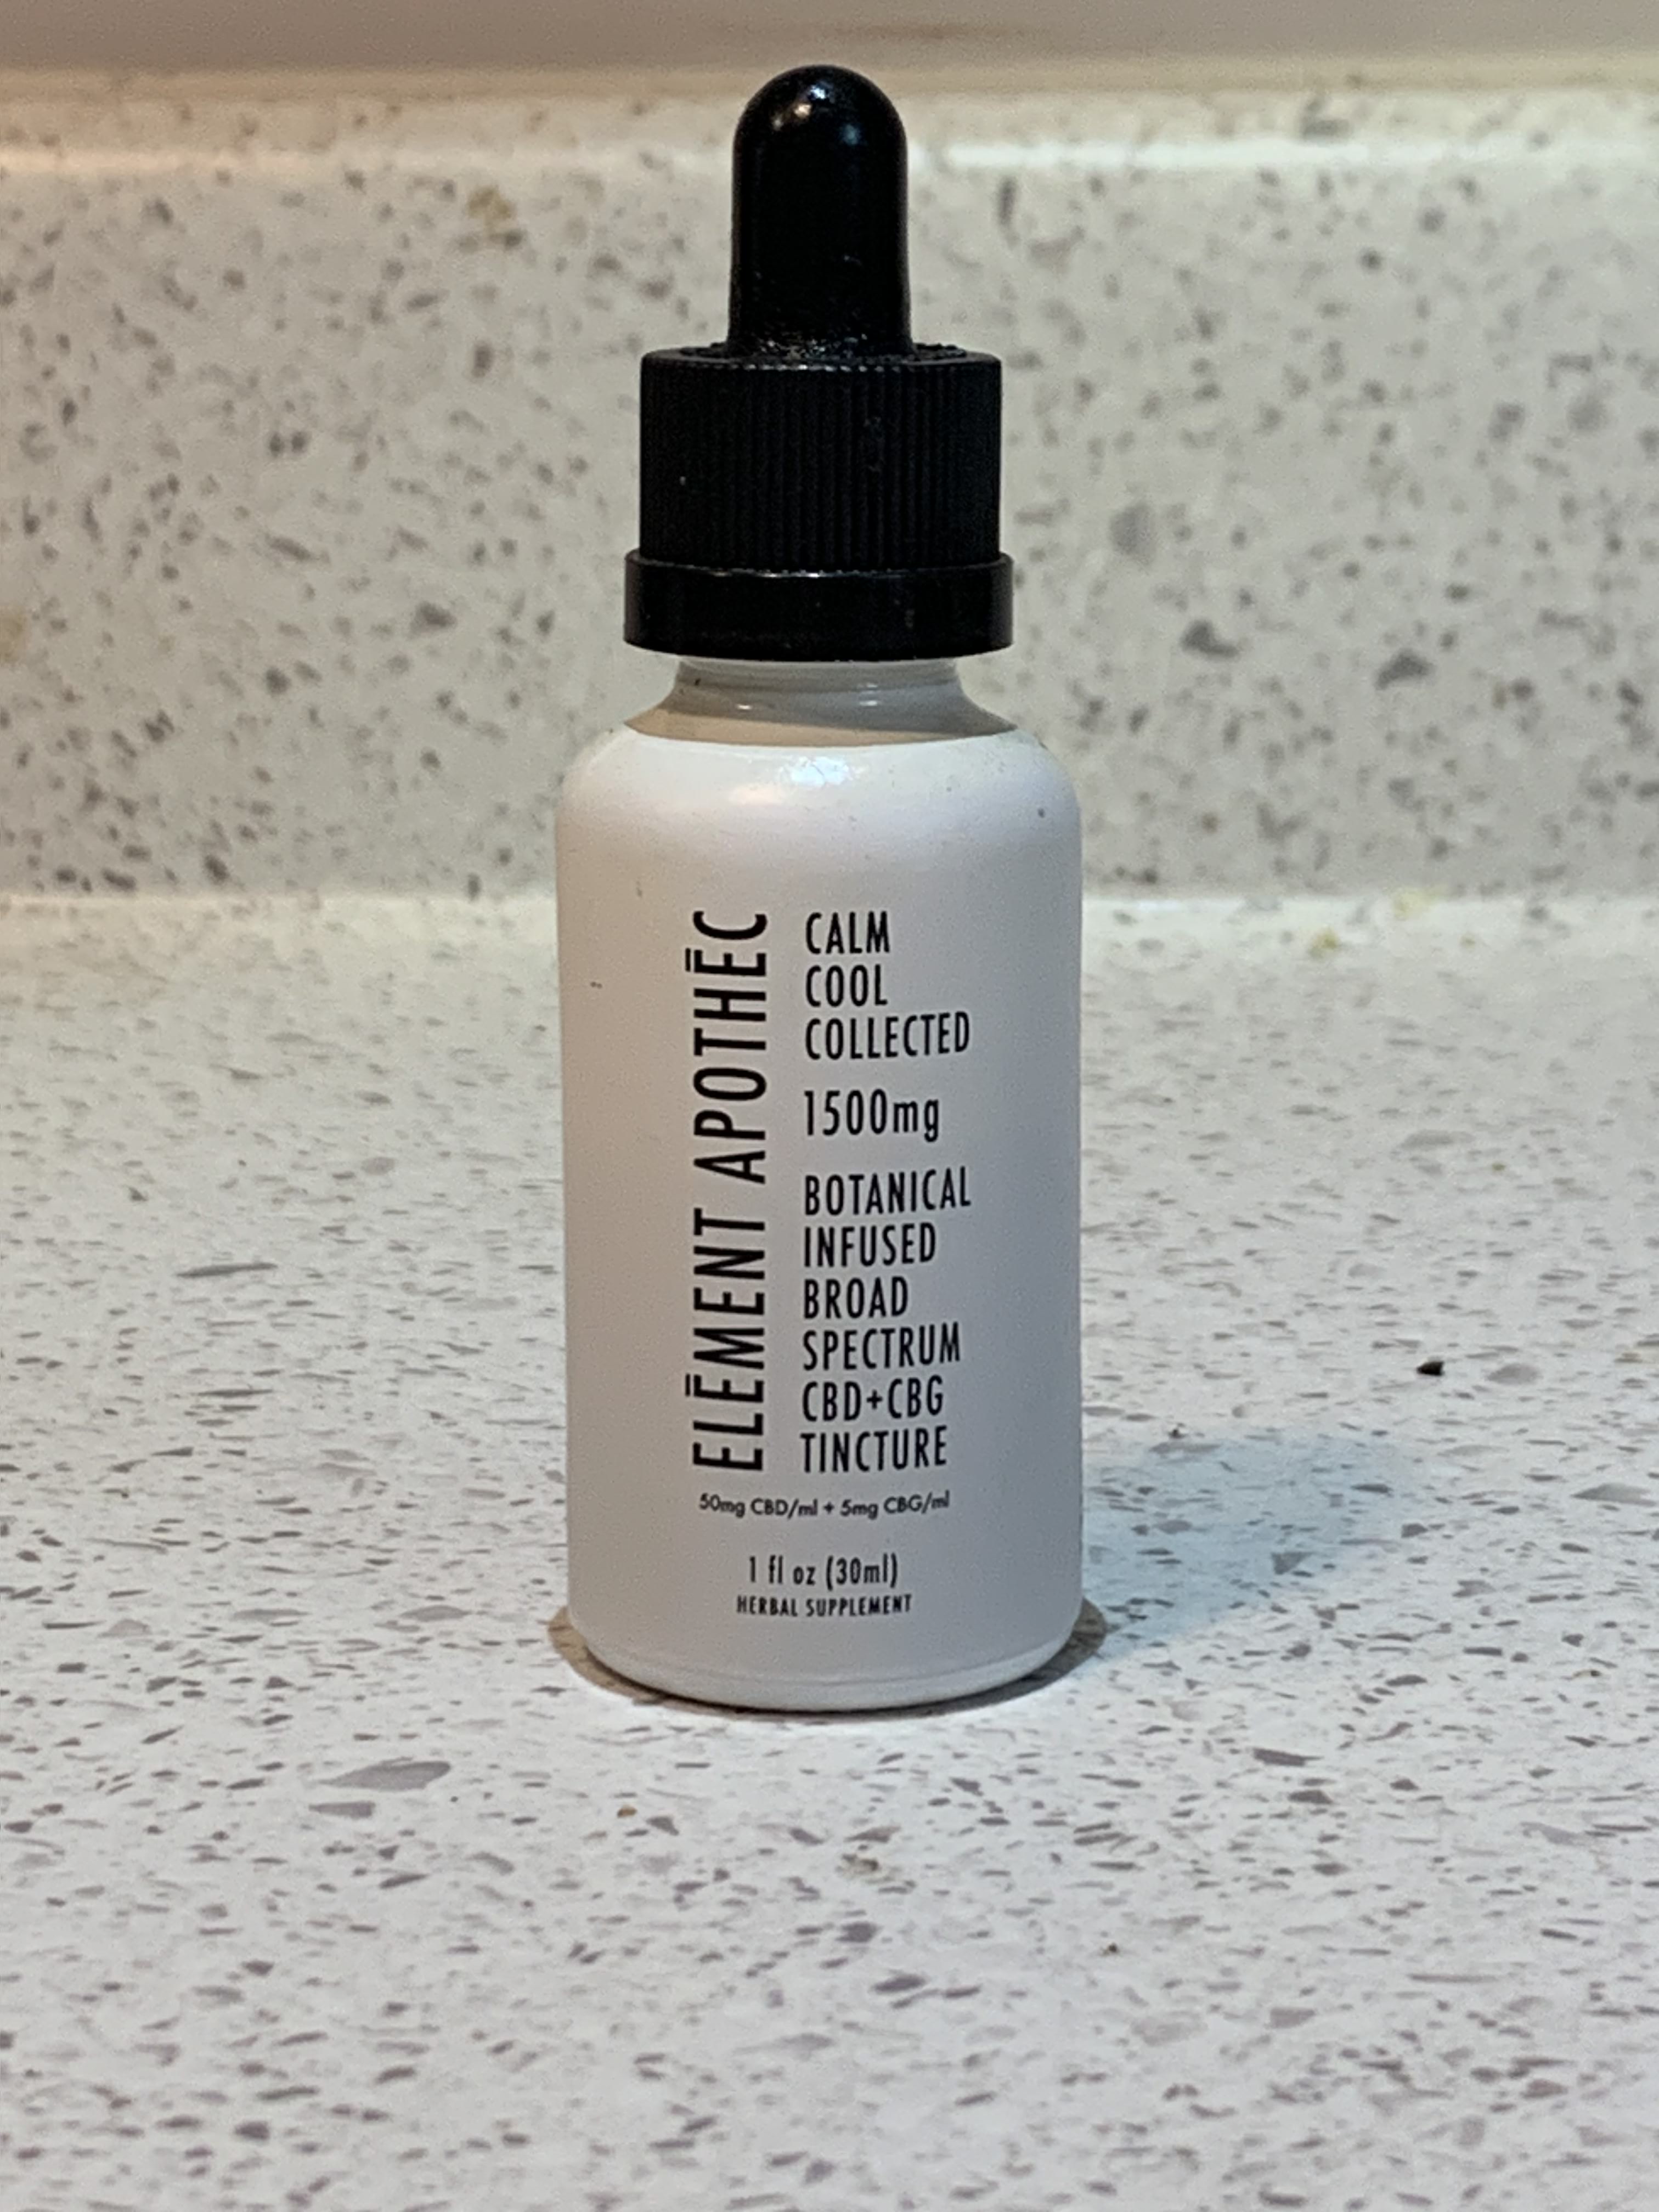 A small white bottle of Element Apothec Cool Calm Collected CBD tincture on a white countertop